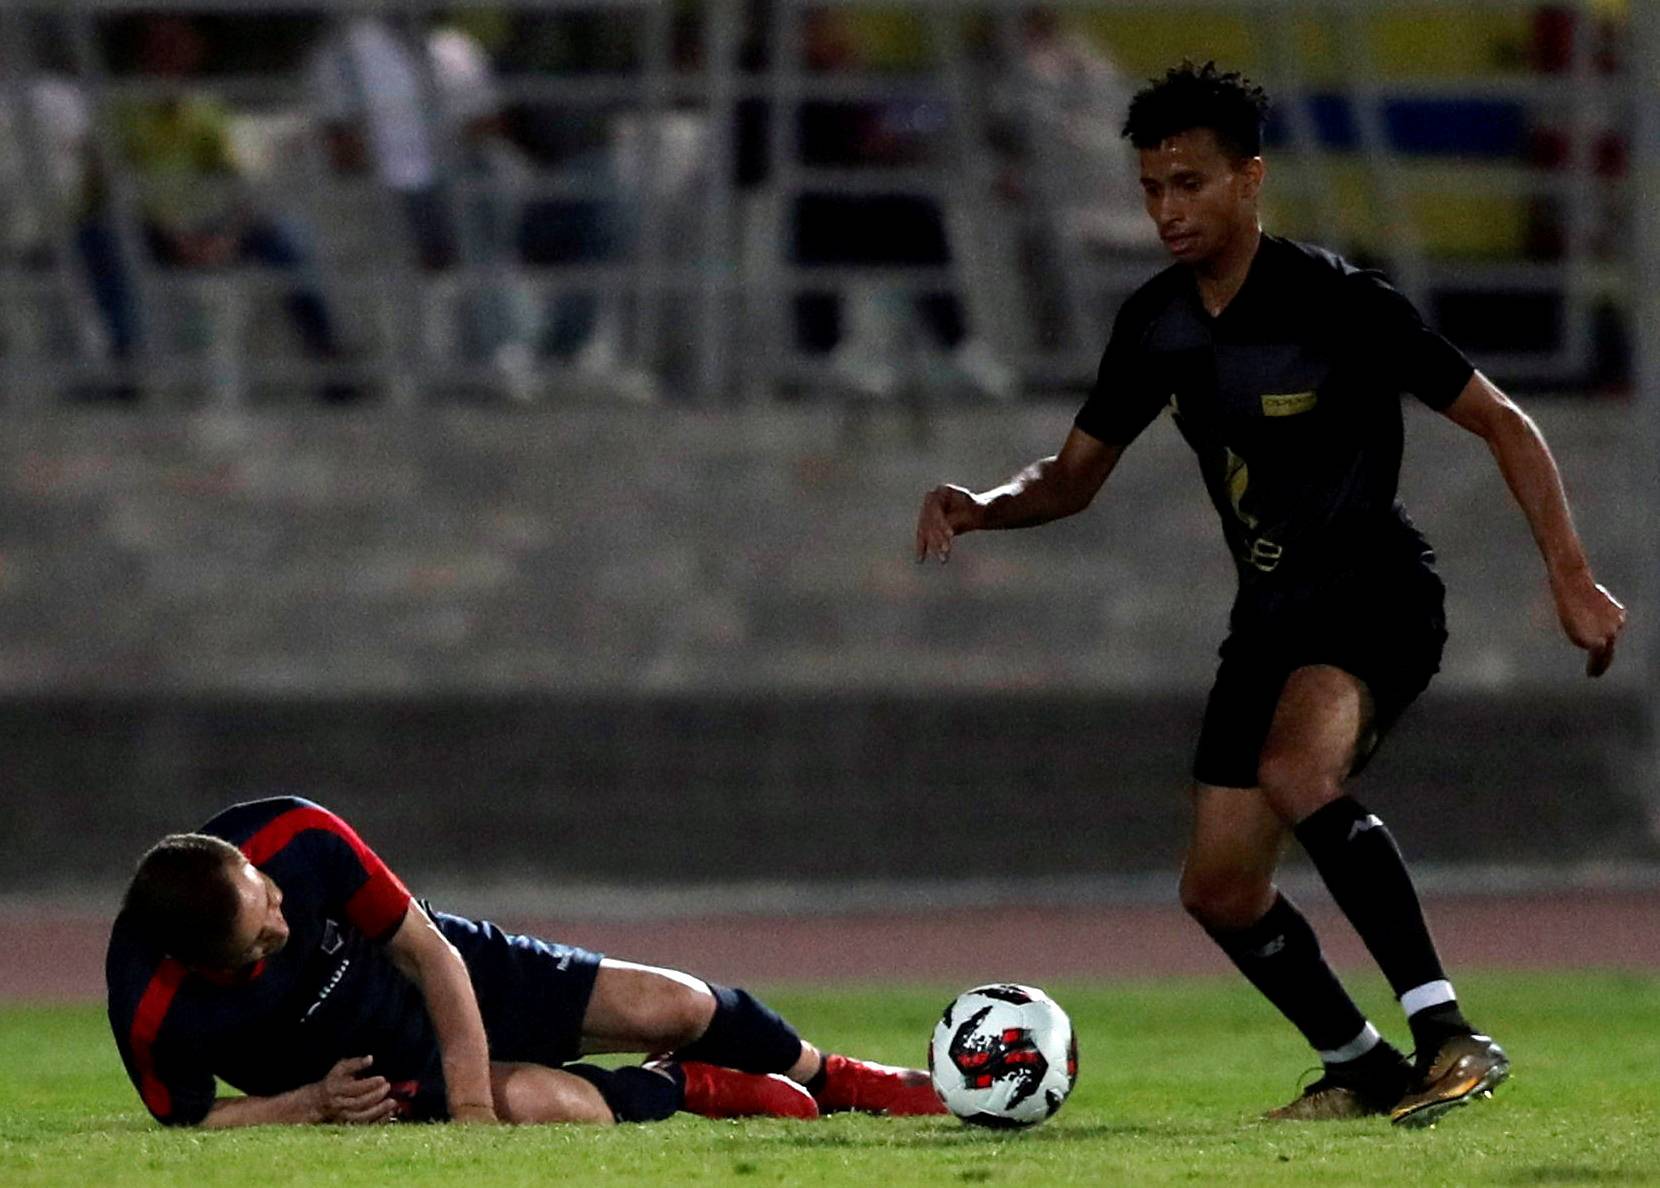 Ezzeldin Bahader, a 74-years-old Egyptian football player of 6th October Club falls down during a soccer match against El Ayat Sports Club of Egypt's third division league at the Olympic Stadium in the Cairo suburb of Maadi